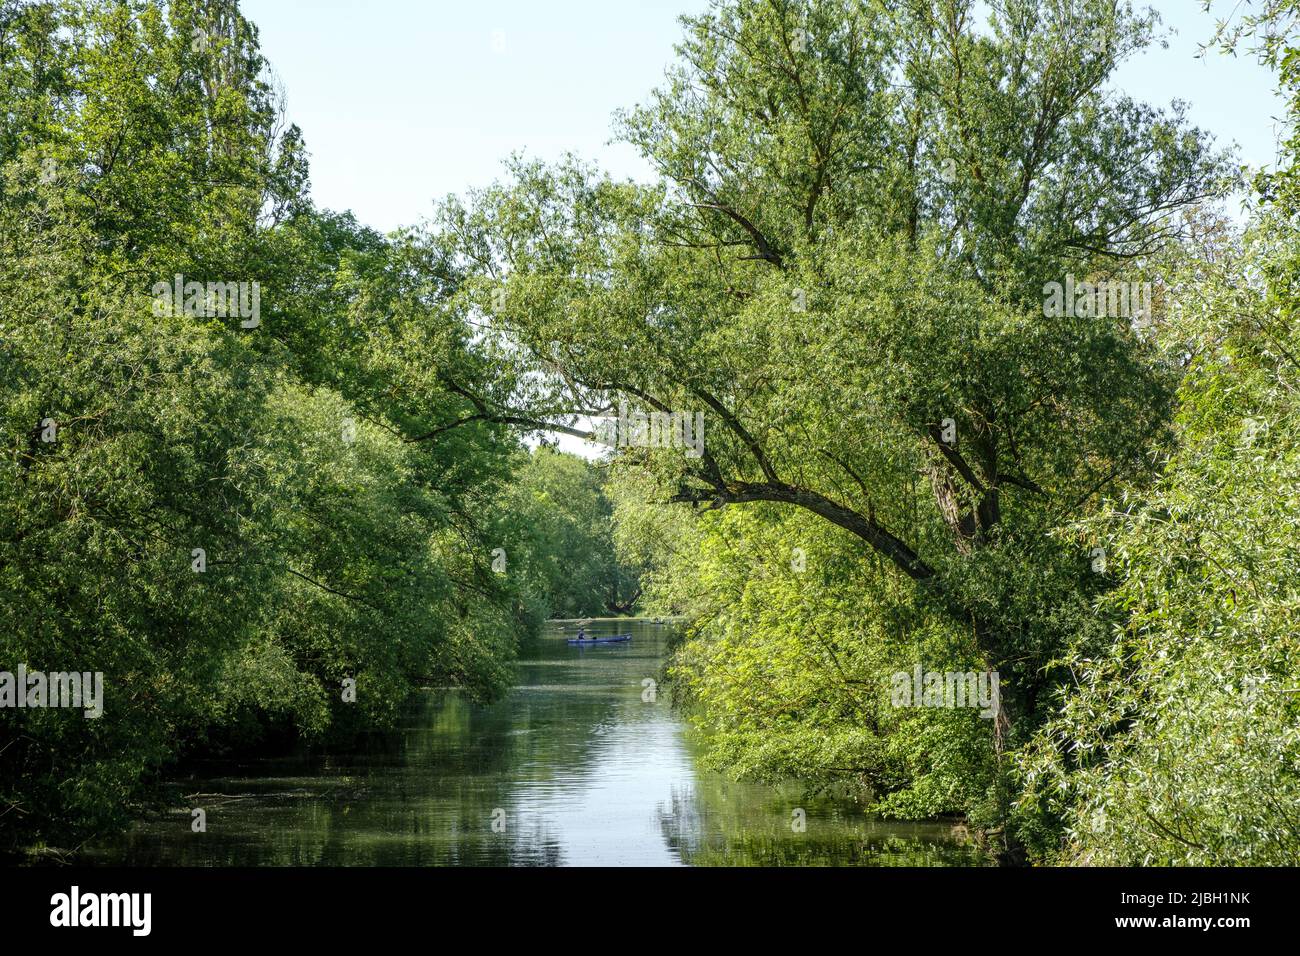 View to the river Tauber in Germany with green trees at the shore and one man in his row boat in the background. Stock Photo